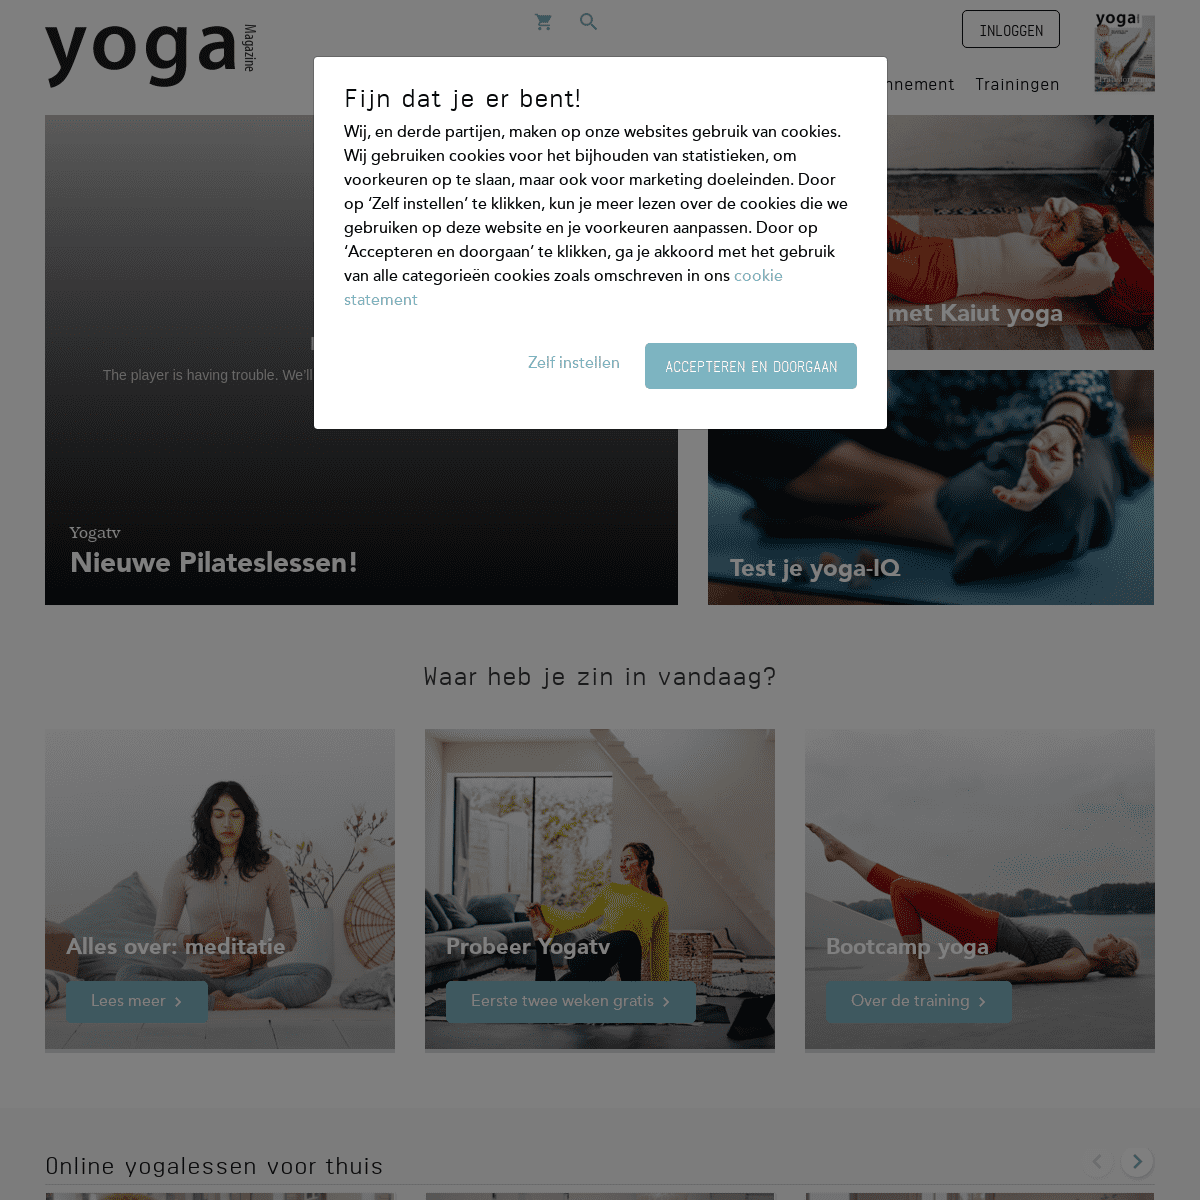 A complete backup of https://yogaonline.nl